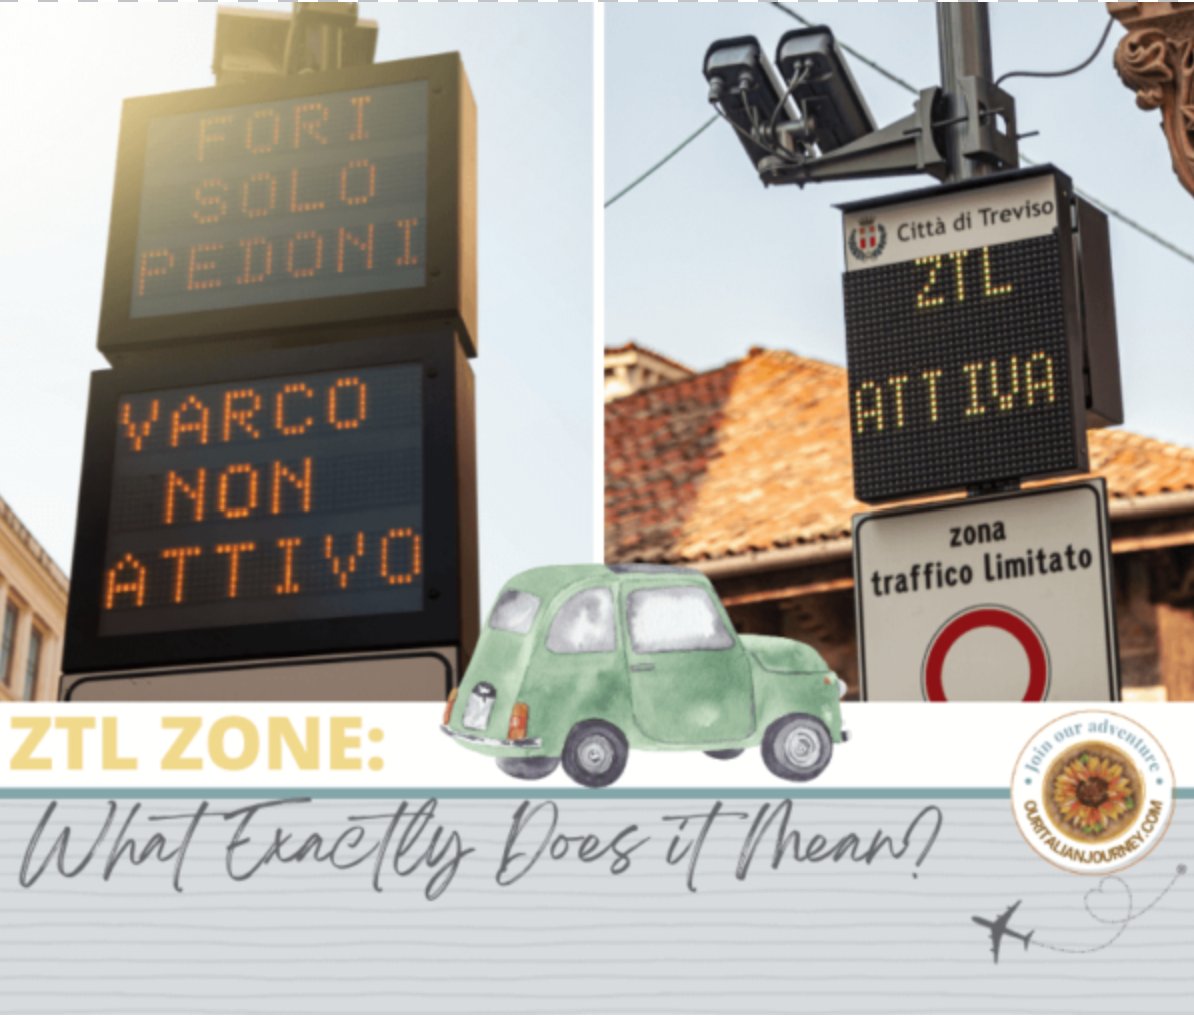 NEW POST:
This one might save you a little aggravation if driving in Italy. 
ouritalianjourney.com/ztl-zone-what-…

#newpost #newpost2024 #newposttday #newblogpost #NewBlogPostAlert #post #postalert  #ZTL #drivinginitaly #italy #ouritalianjourney